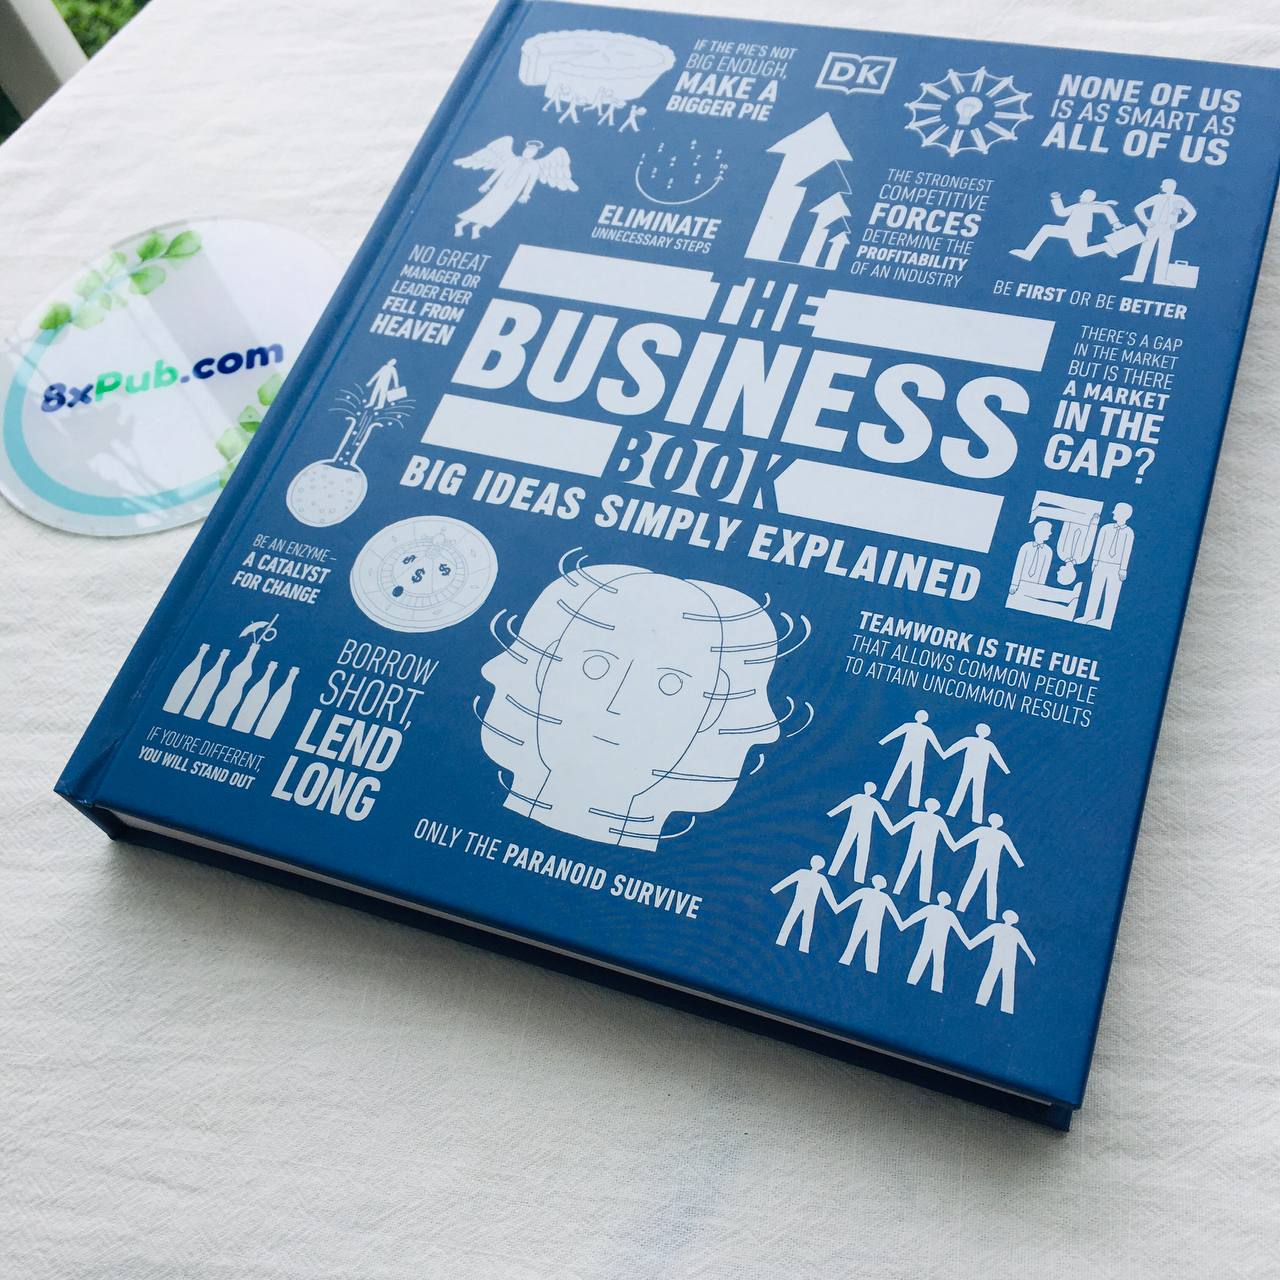 DK books | The Big Ideas Simply Explained : The Business Book